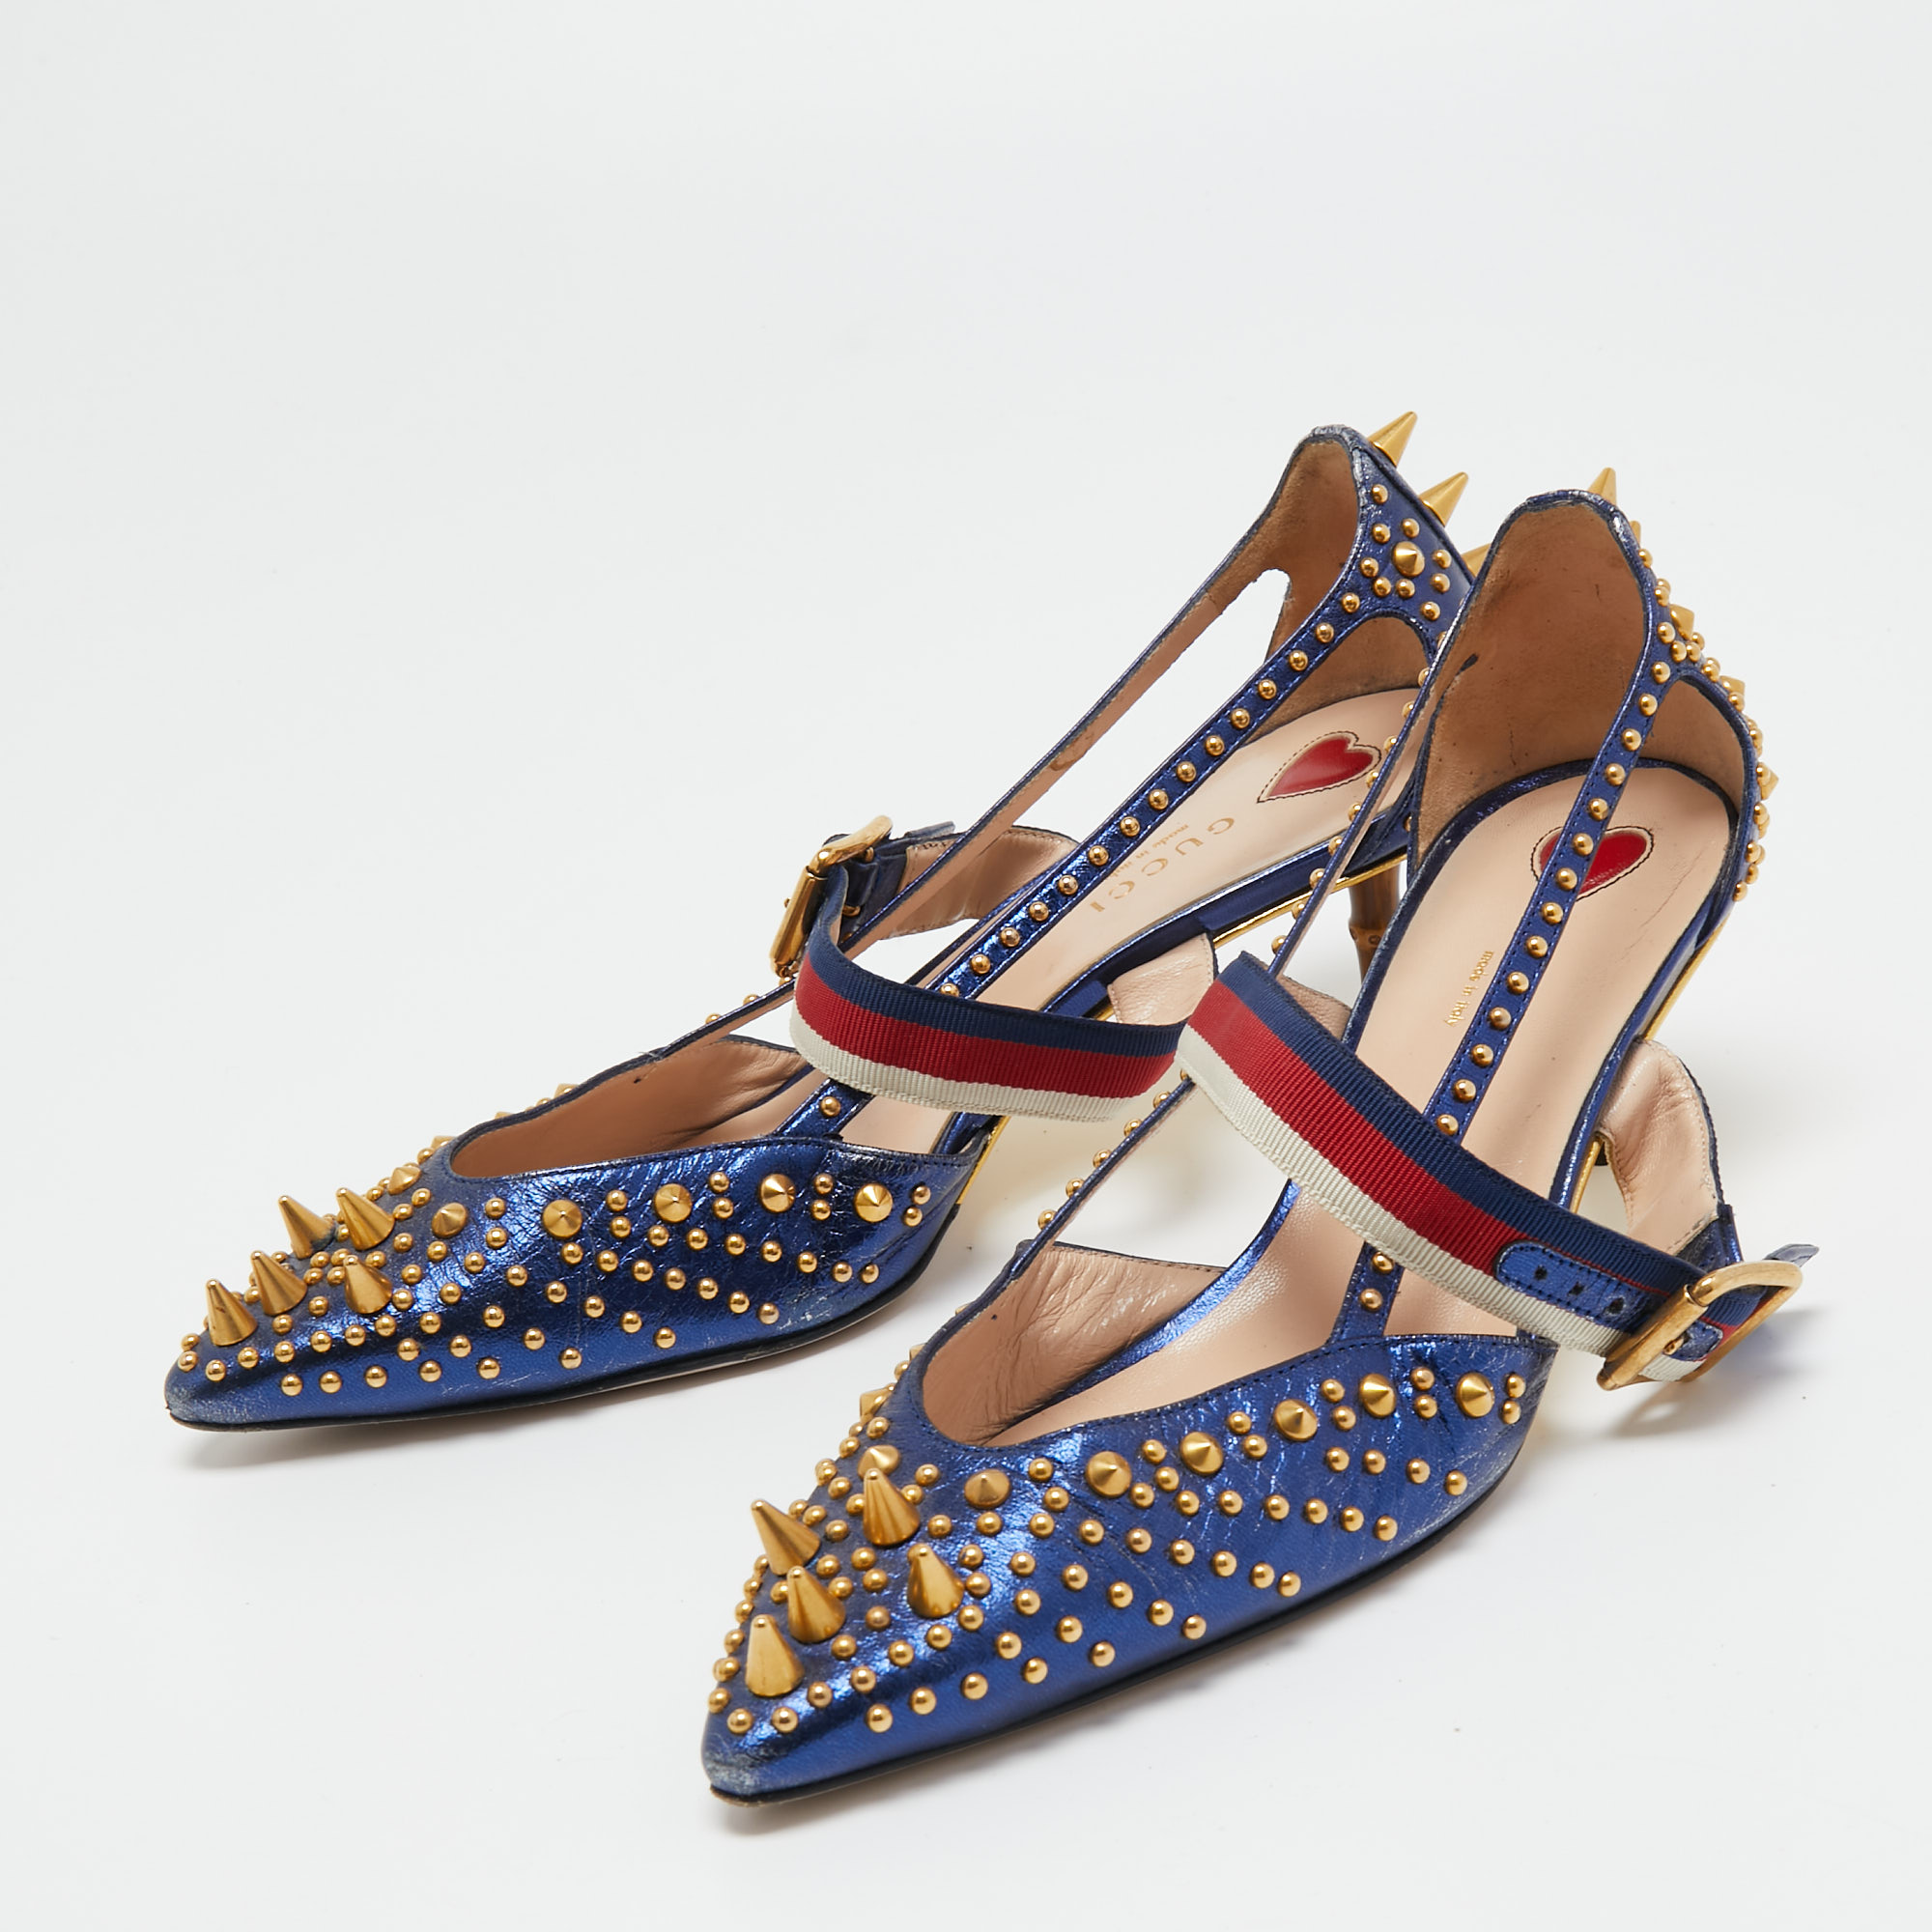 

Gucci Metallic Blue Studded Leather Sylvie Mary Jane Pumps Size